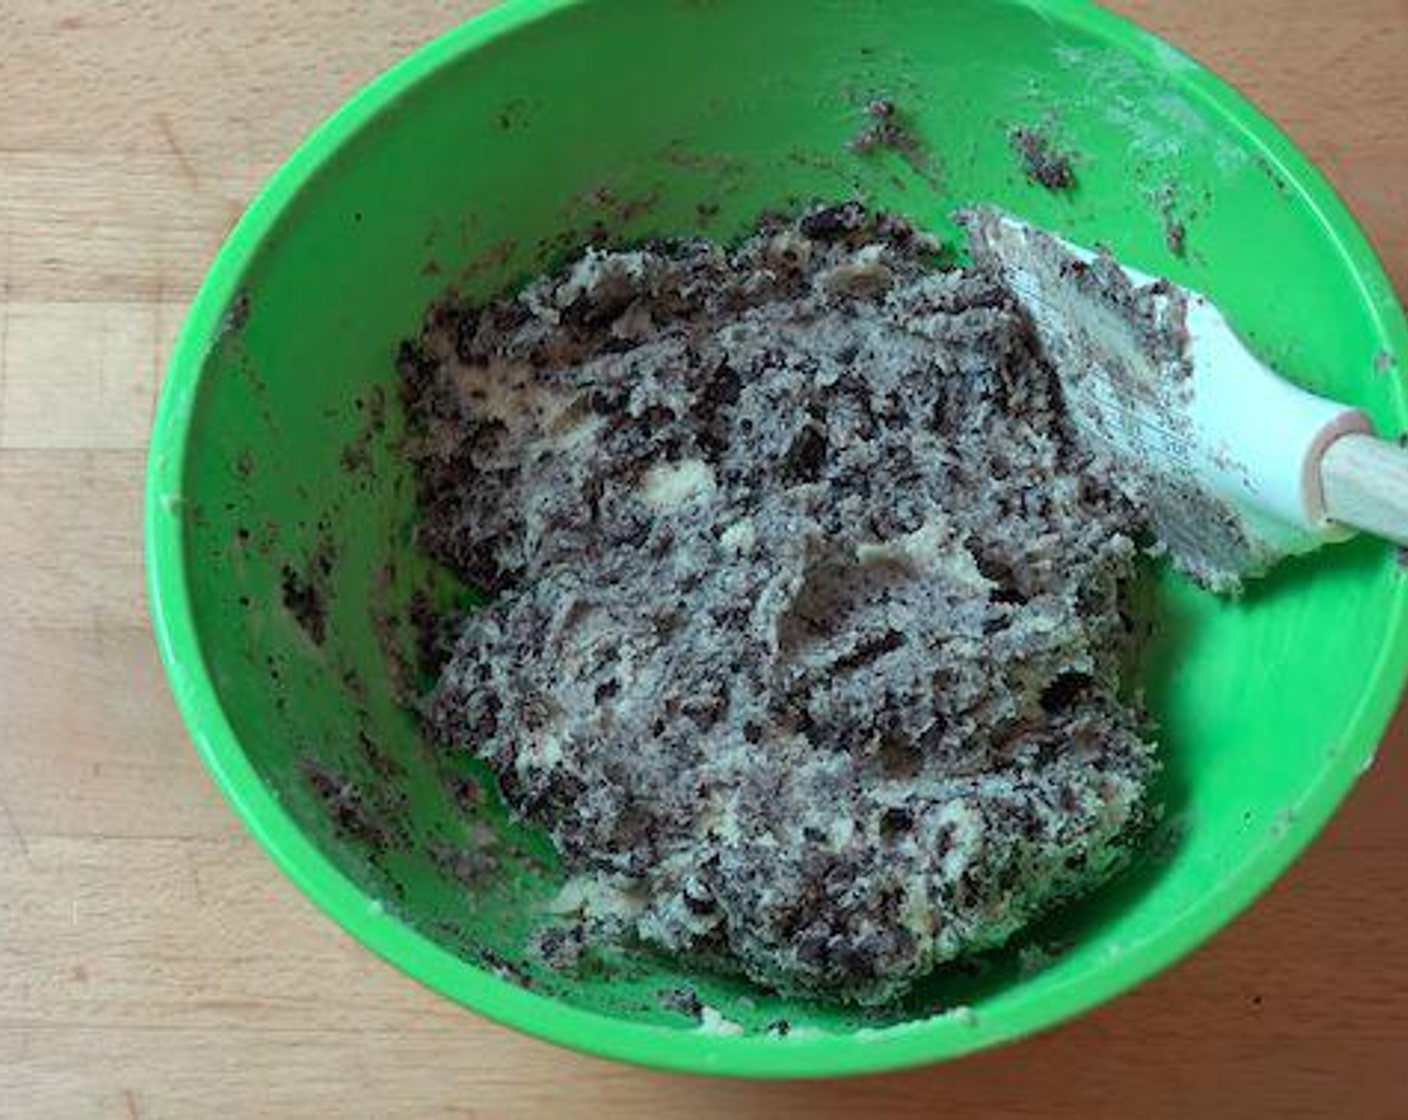 step 4 Add the crushed Oreo cookies. Using a spoon or spatula fold the cookies into the mixture. Cover the mixture with plastic wrap and place in fridge to firm up for half an hour.